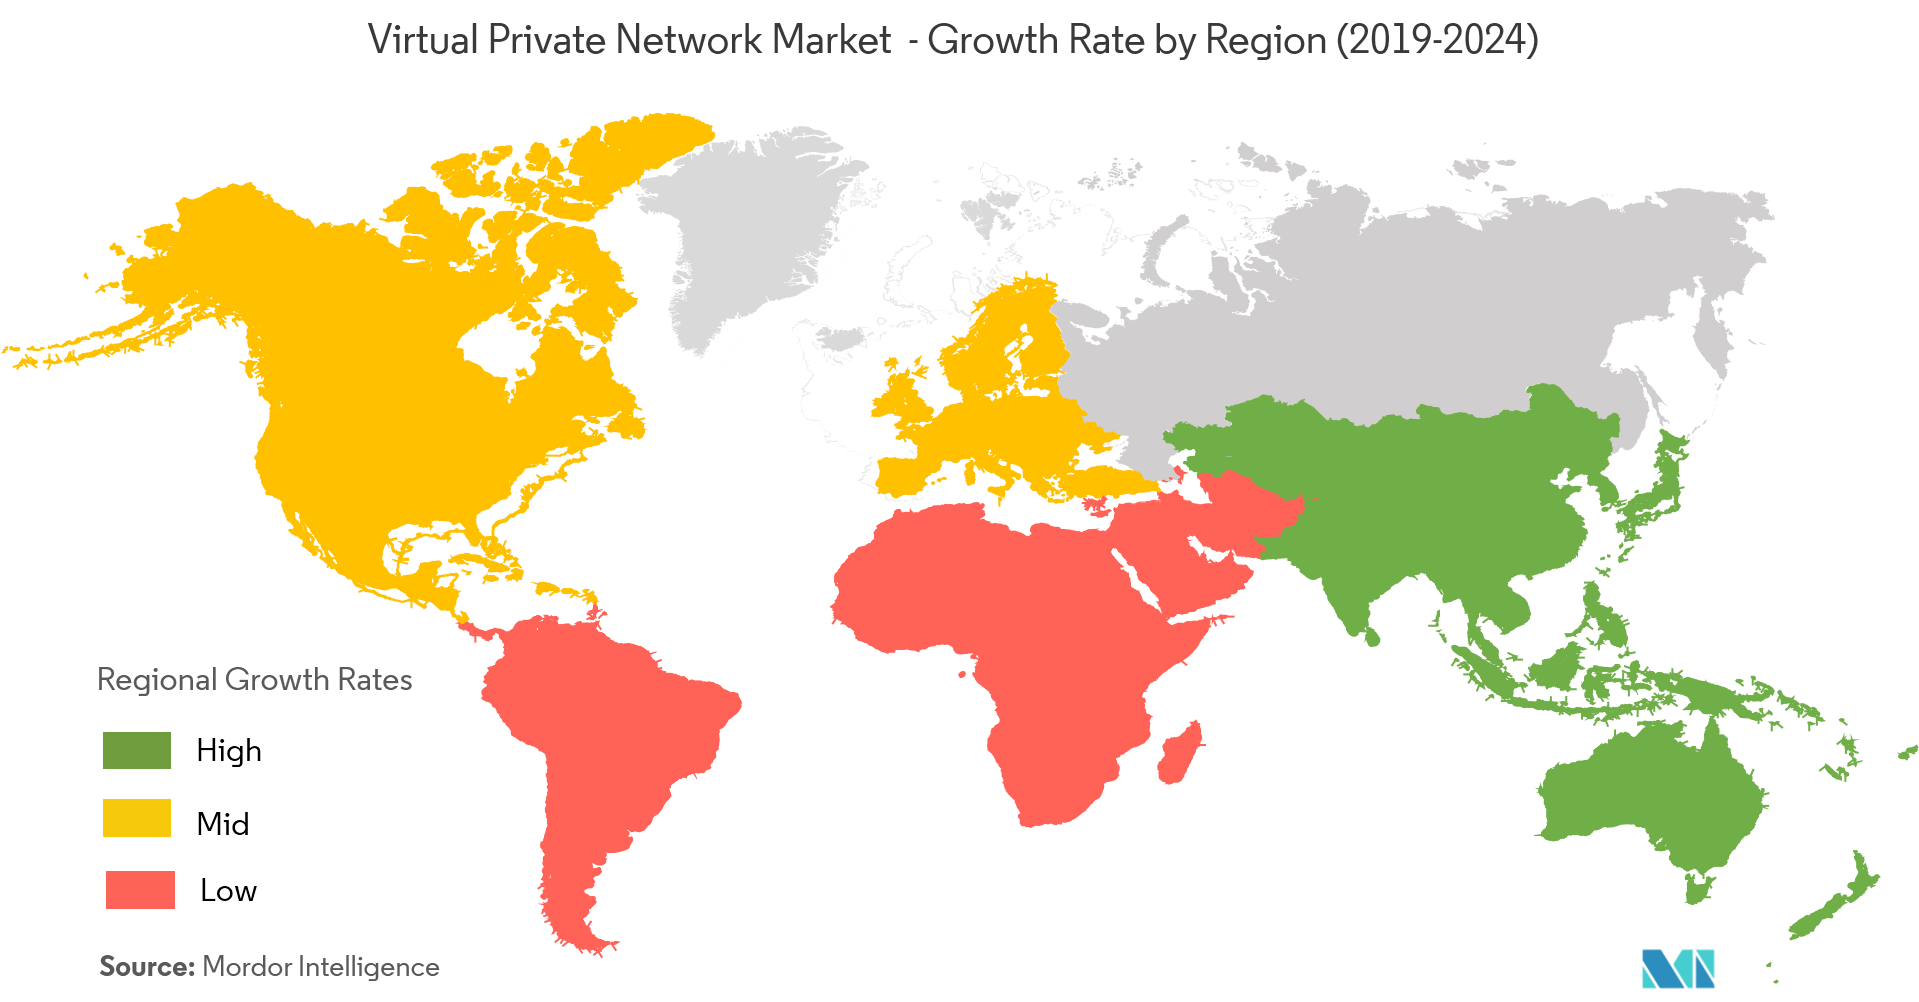 Virtual Private Network Market - Growth Rate by Region (2019 - 2024)